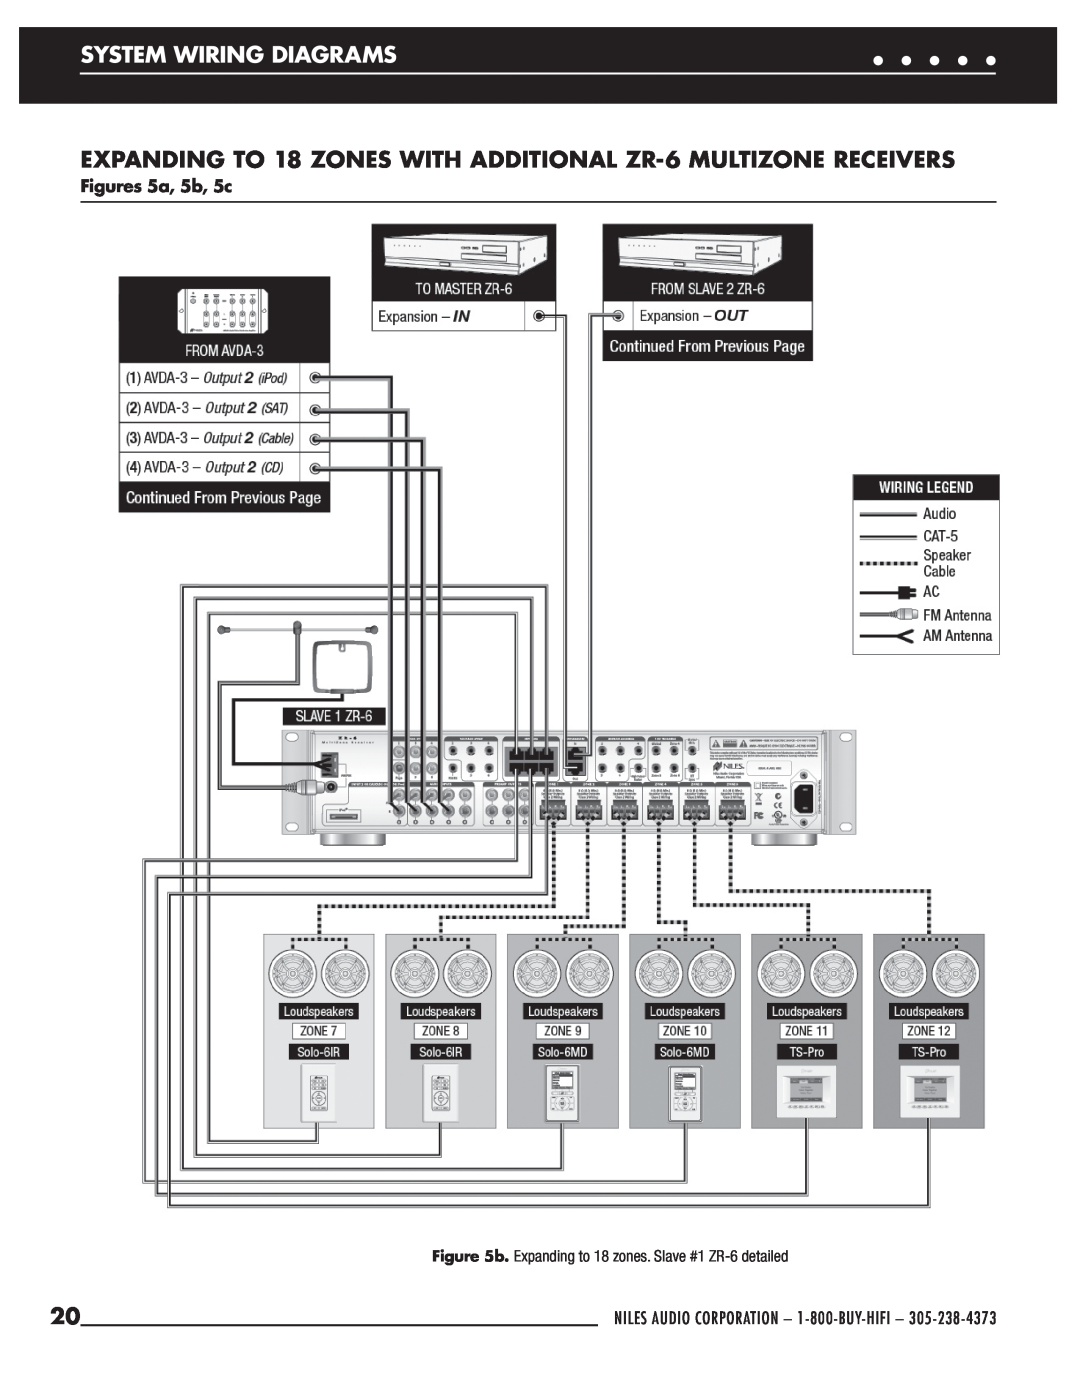 Niles Audio ZR-6 manual System Wiring Diagrams, Figures 5a, 5b, 5c 